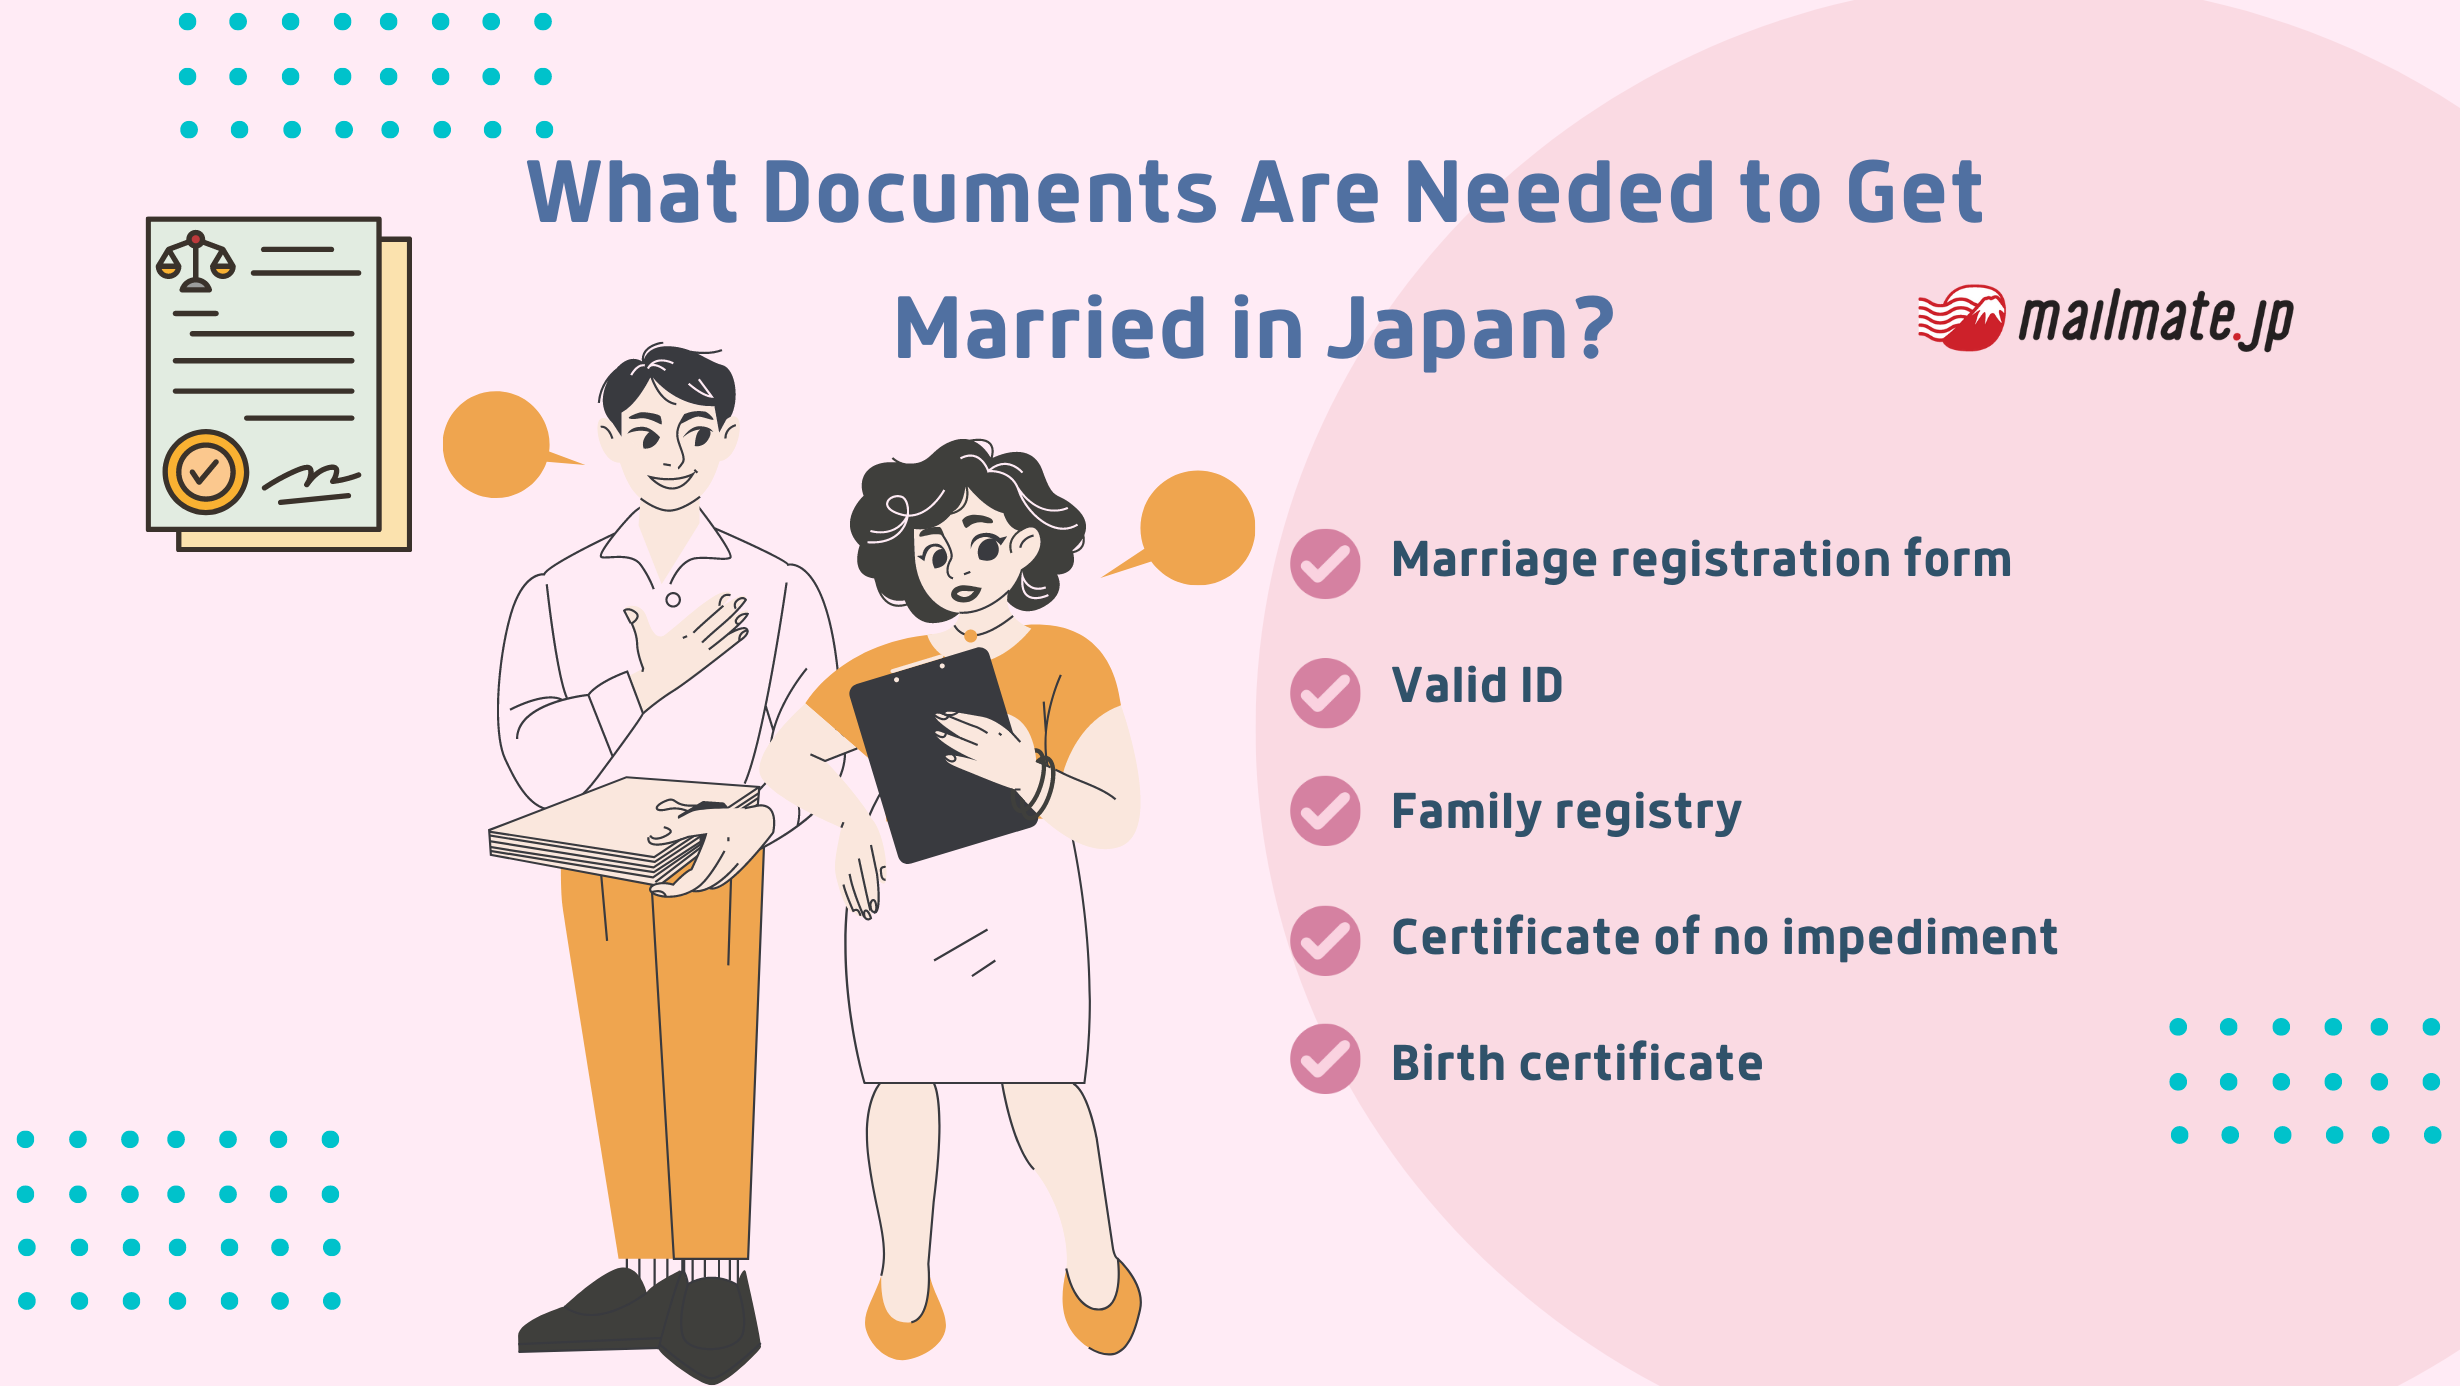 How to Get Married in Japan [Checklist & Guide]